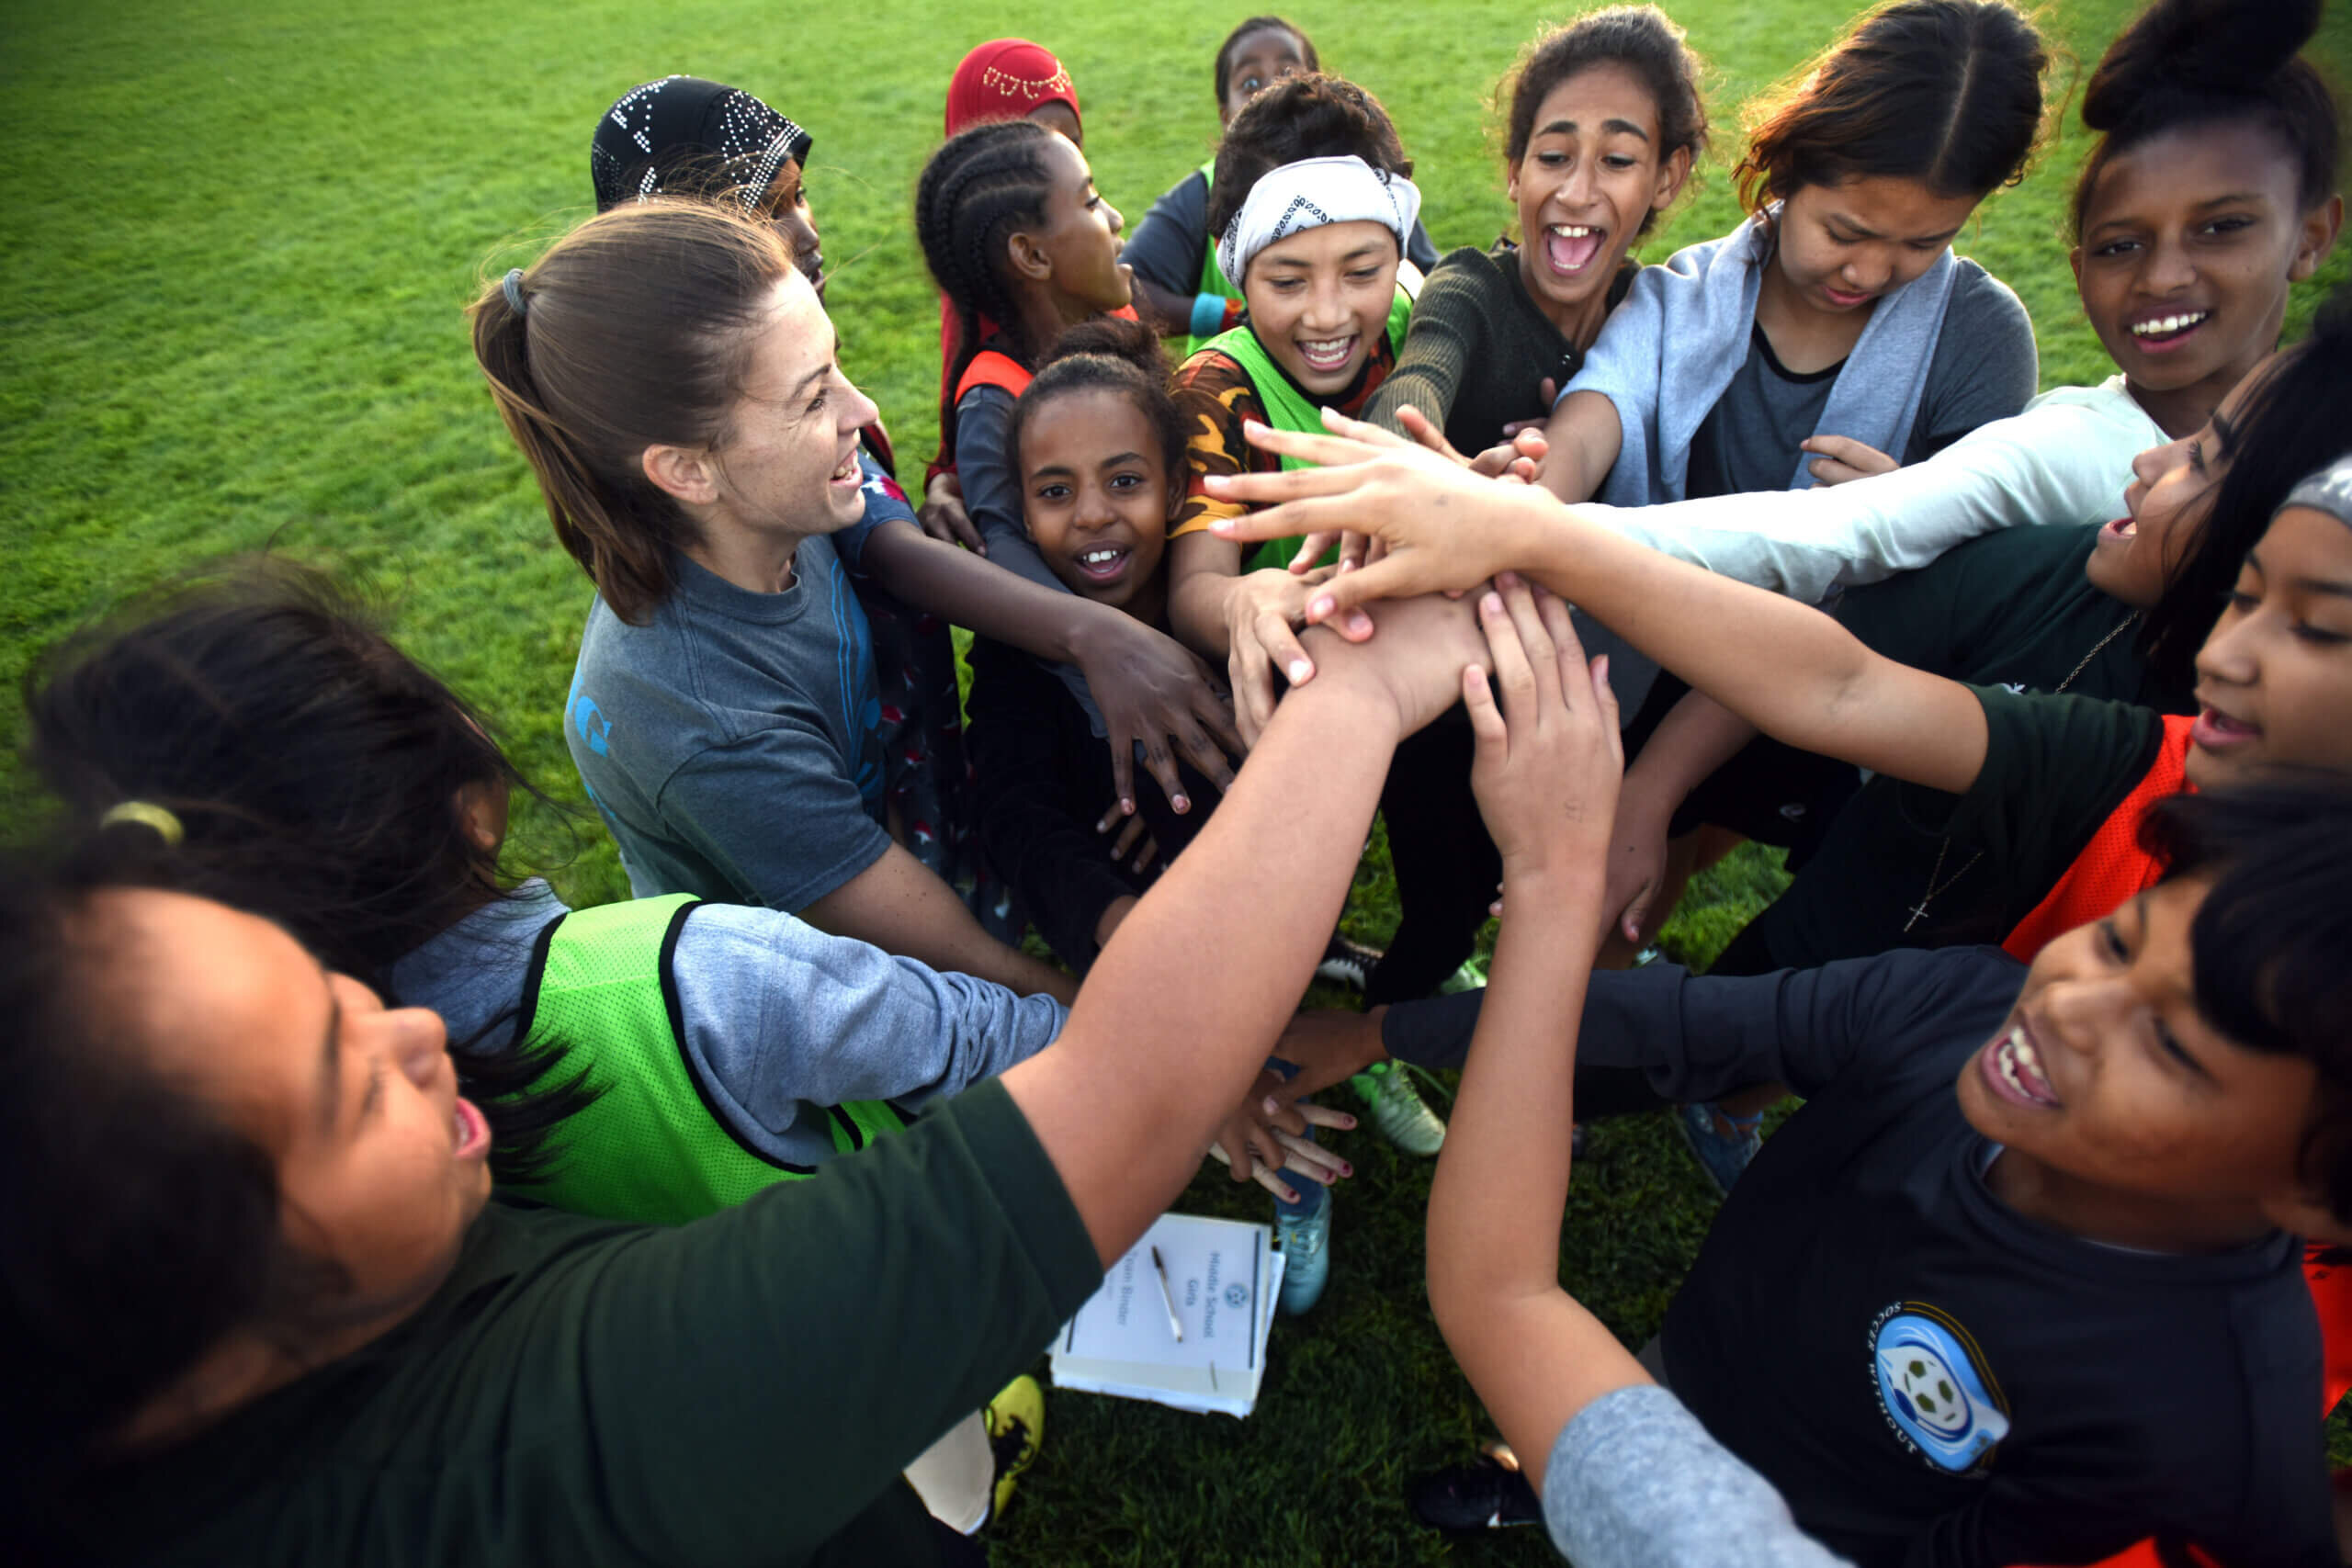 A group of young soccer players from Soccer Without Borders puts their hands in a circle